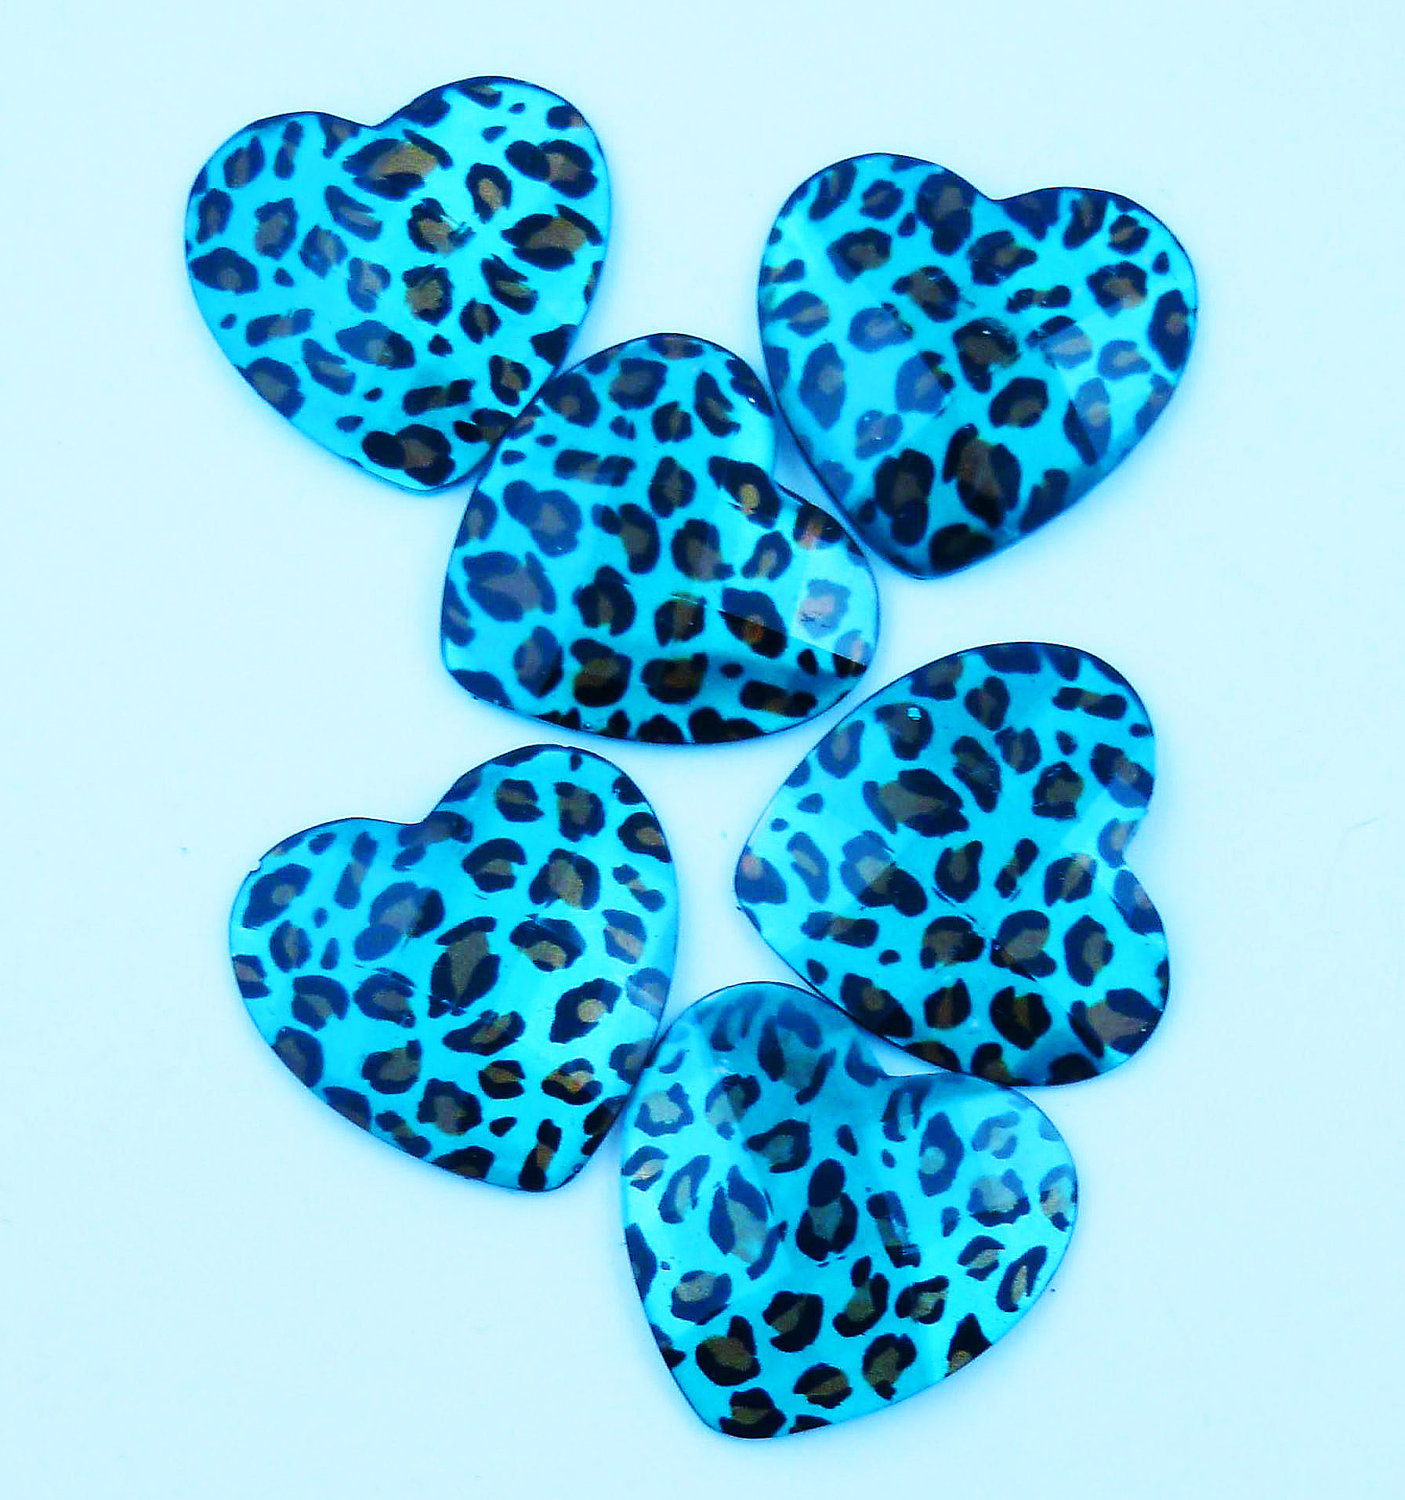 Blue Leopard Print Heart Cabochons by NeonNarwhal on Etsy